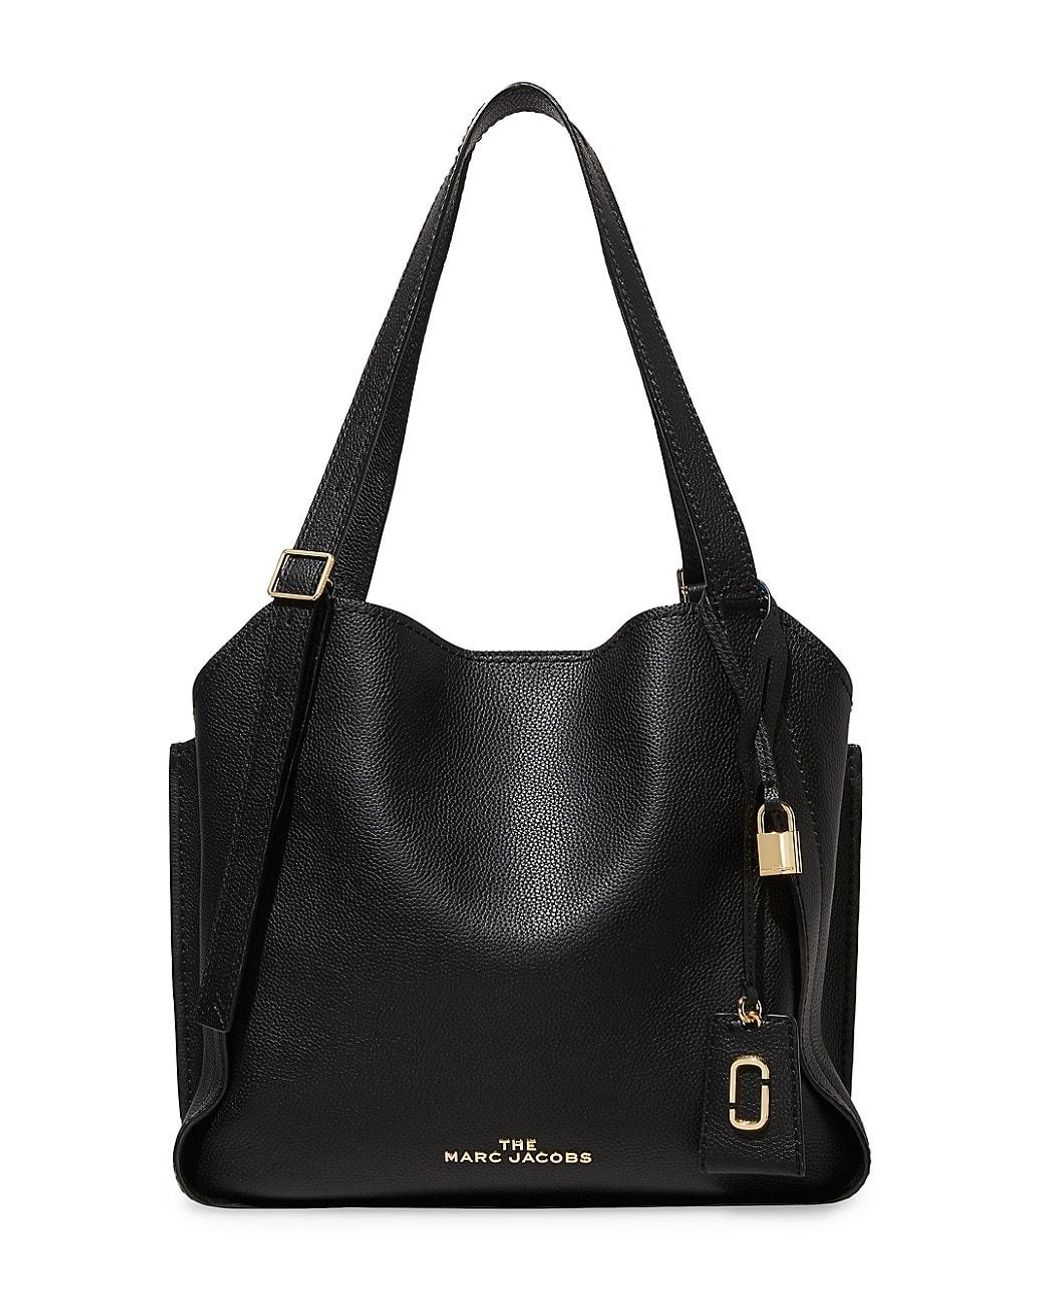 Marc Jacobs The Director Leather Tote in Black - Lyst